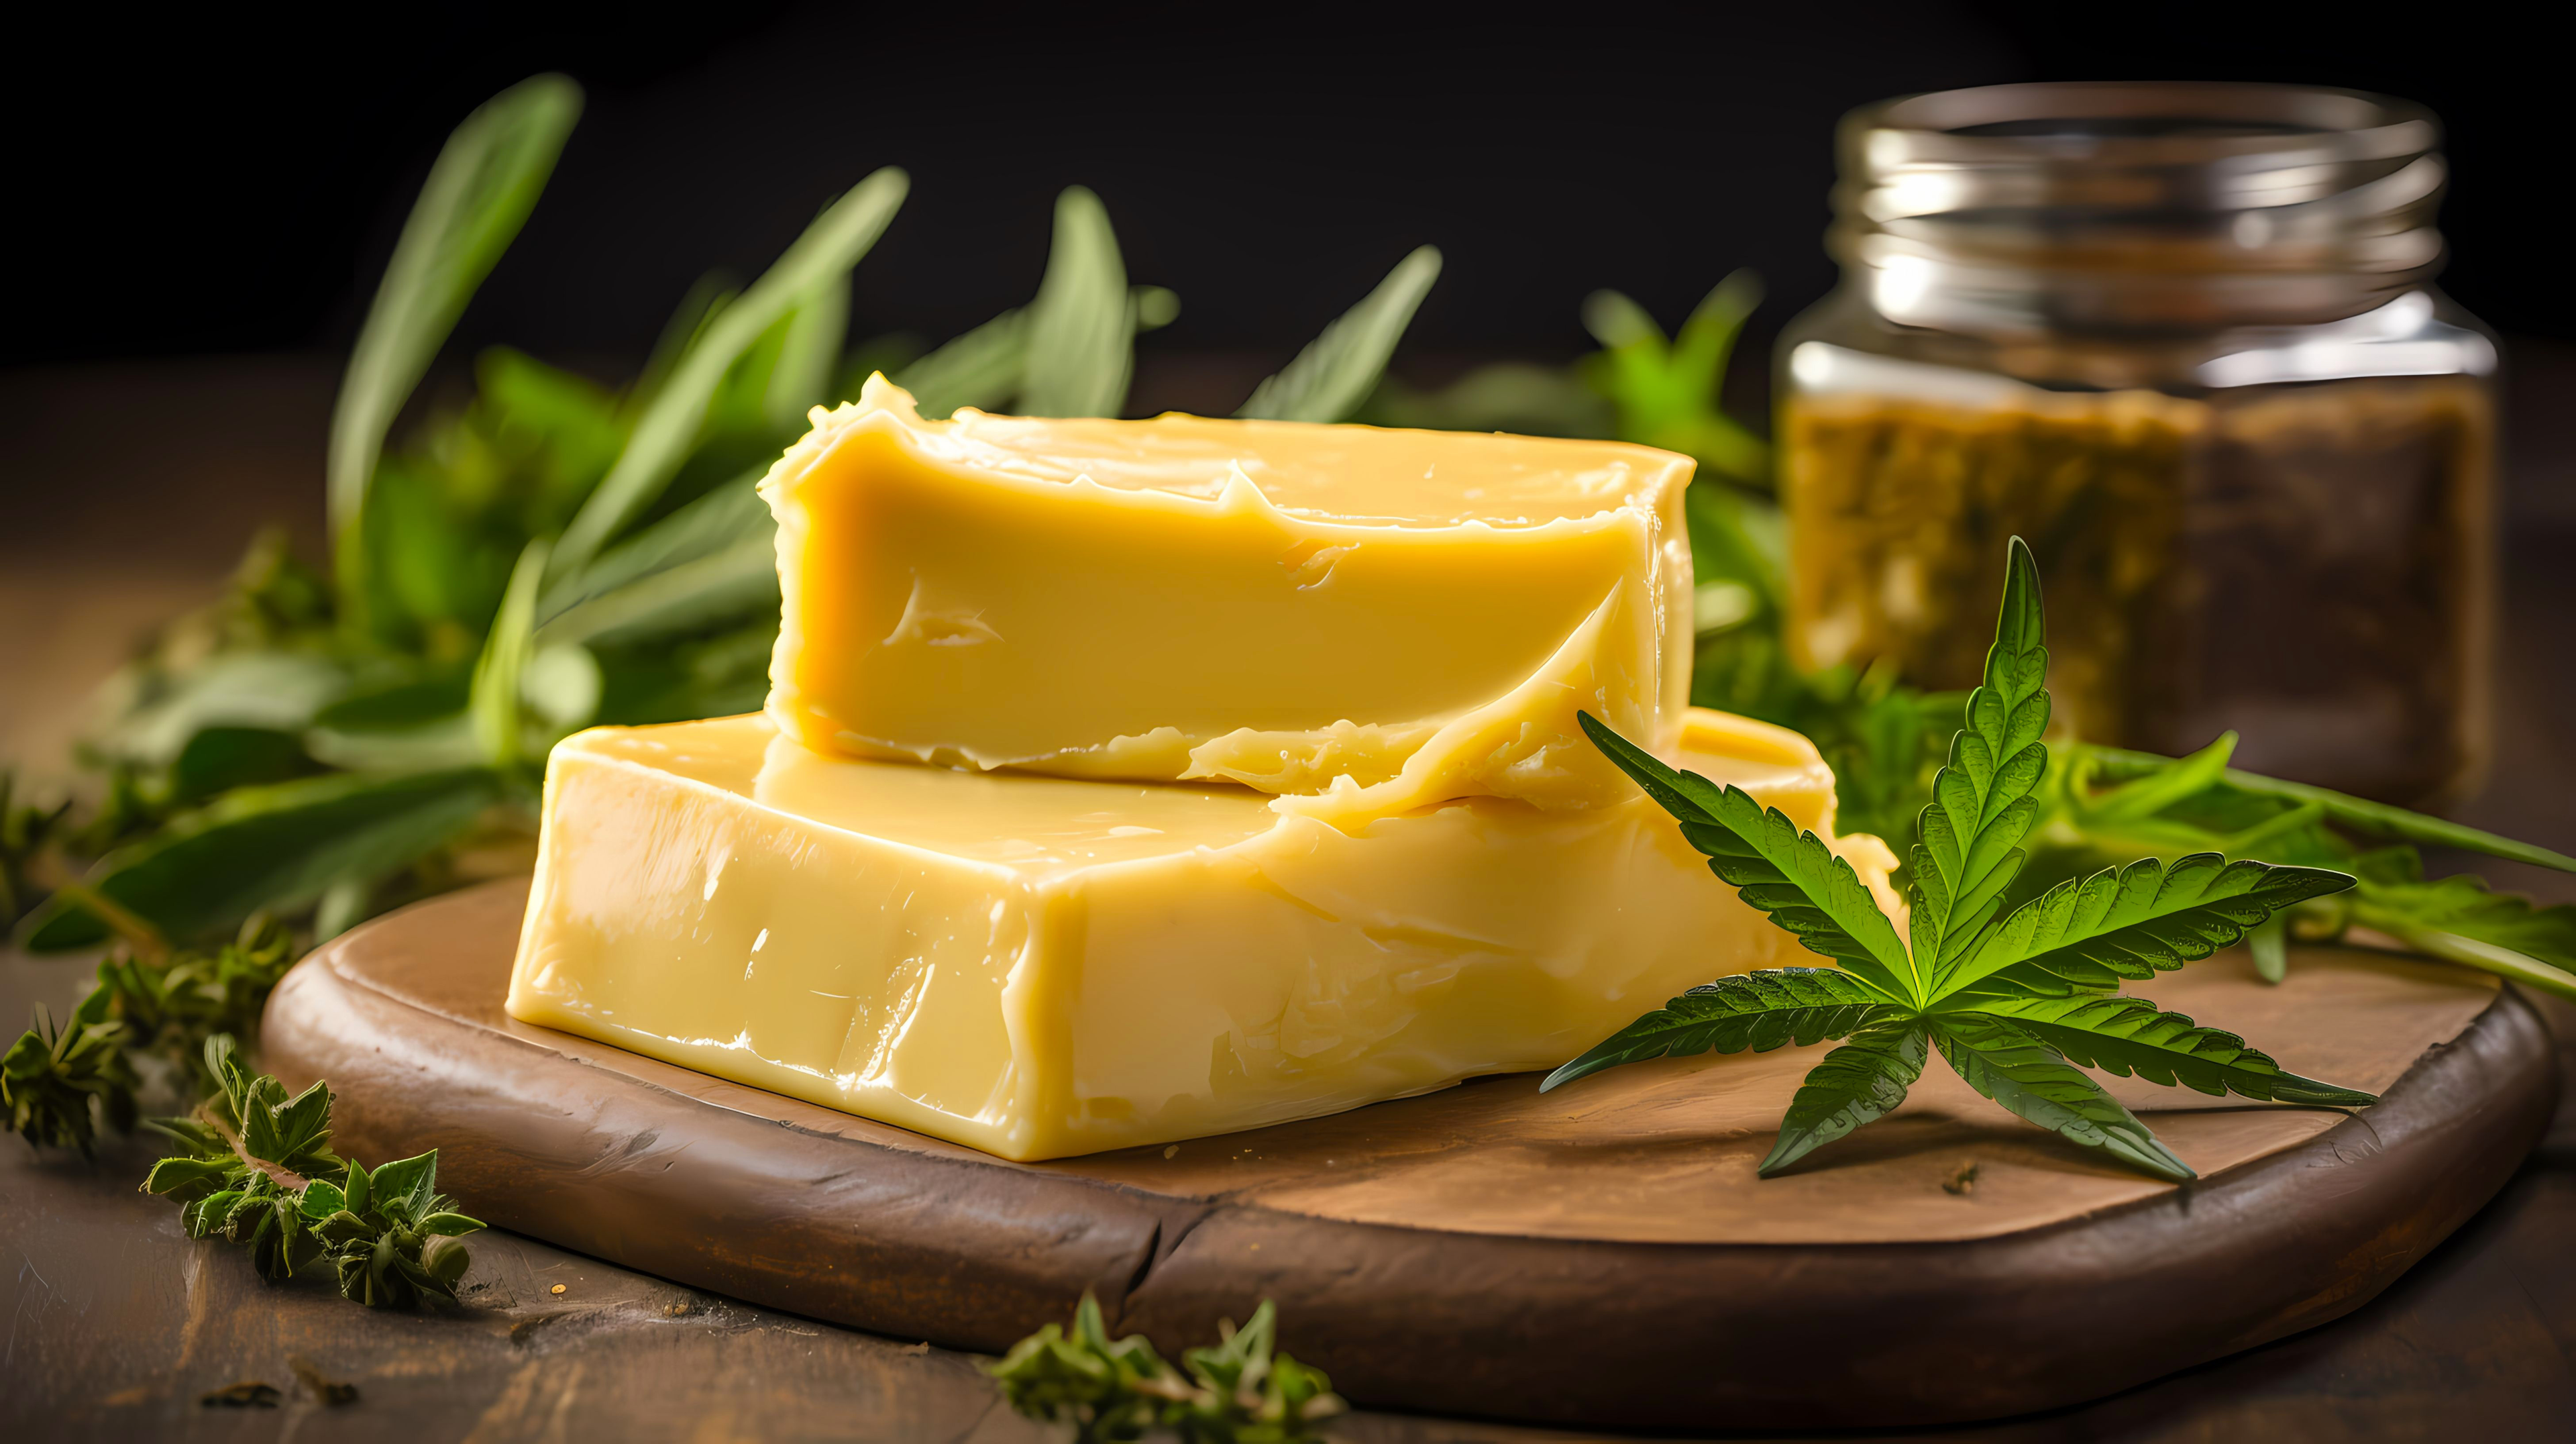 Cannabutter is half the party. Some use oil, but regardless, you're bound for adventure when mix the butter with sugar and other ingredients to taste the ultimate dessert. No baking powder or fruit juice needed. Just Delta 9 or hemp flower.